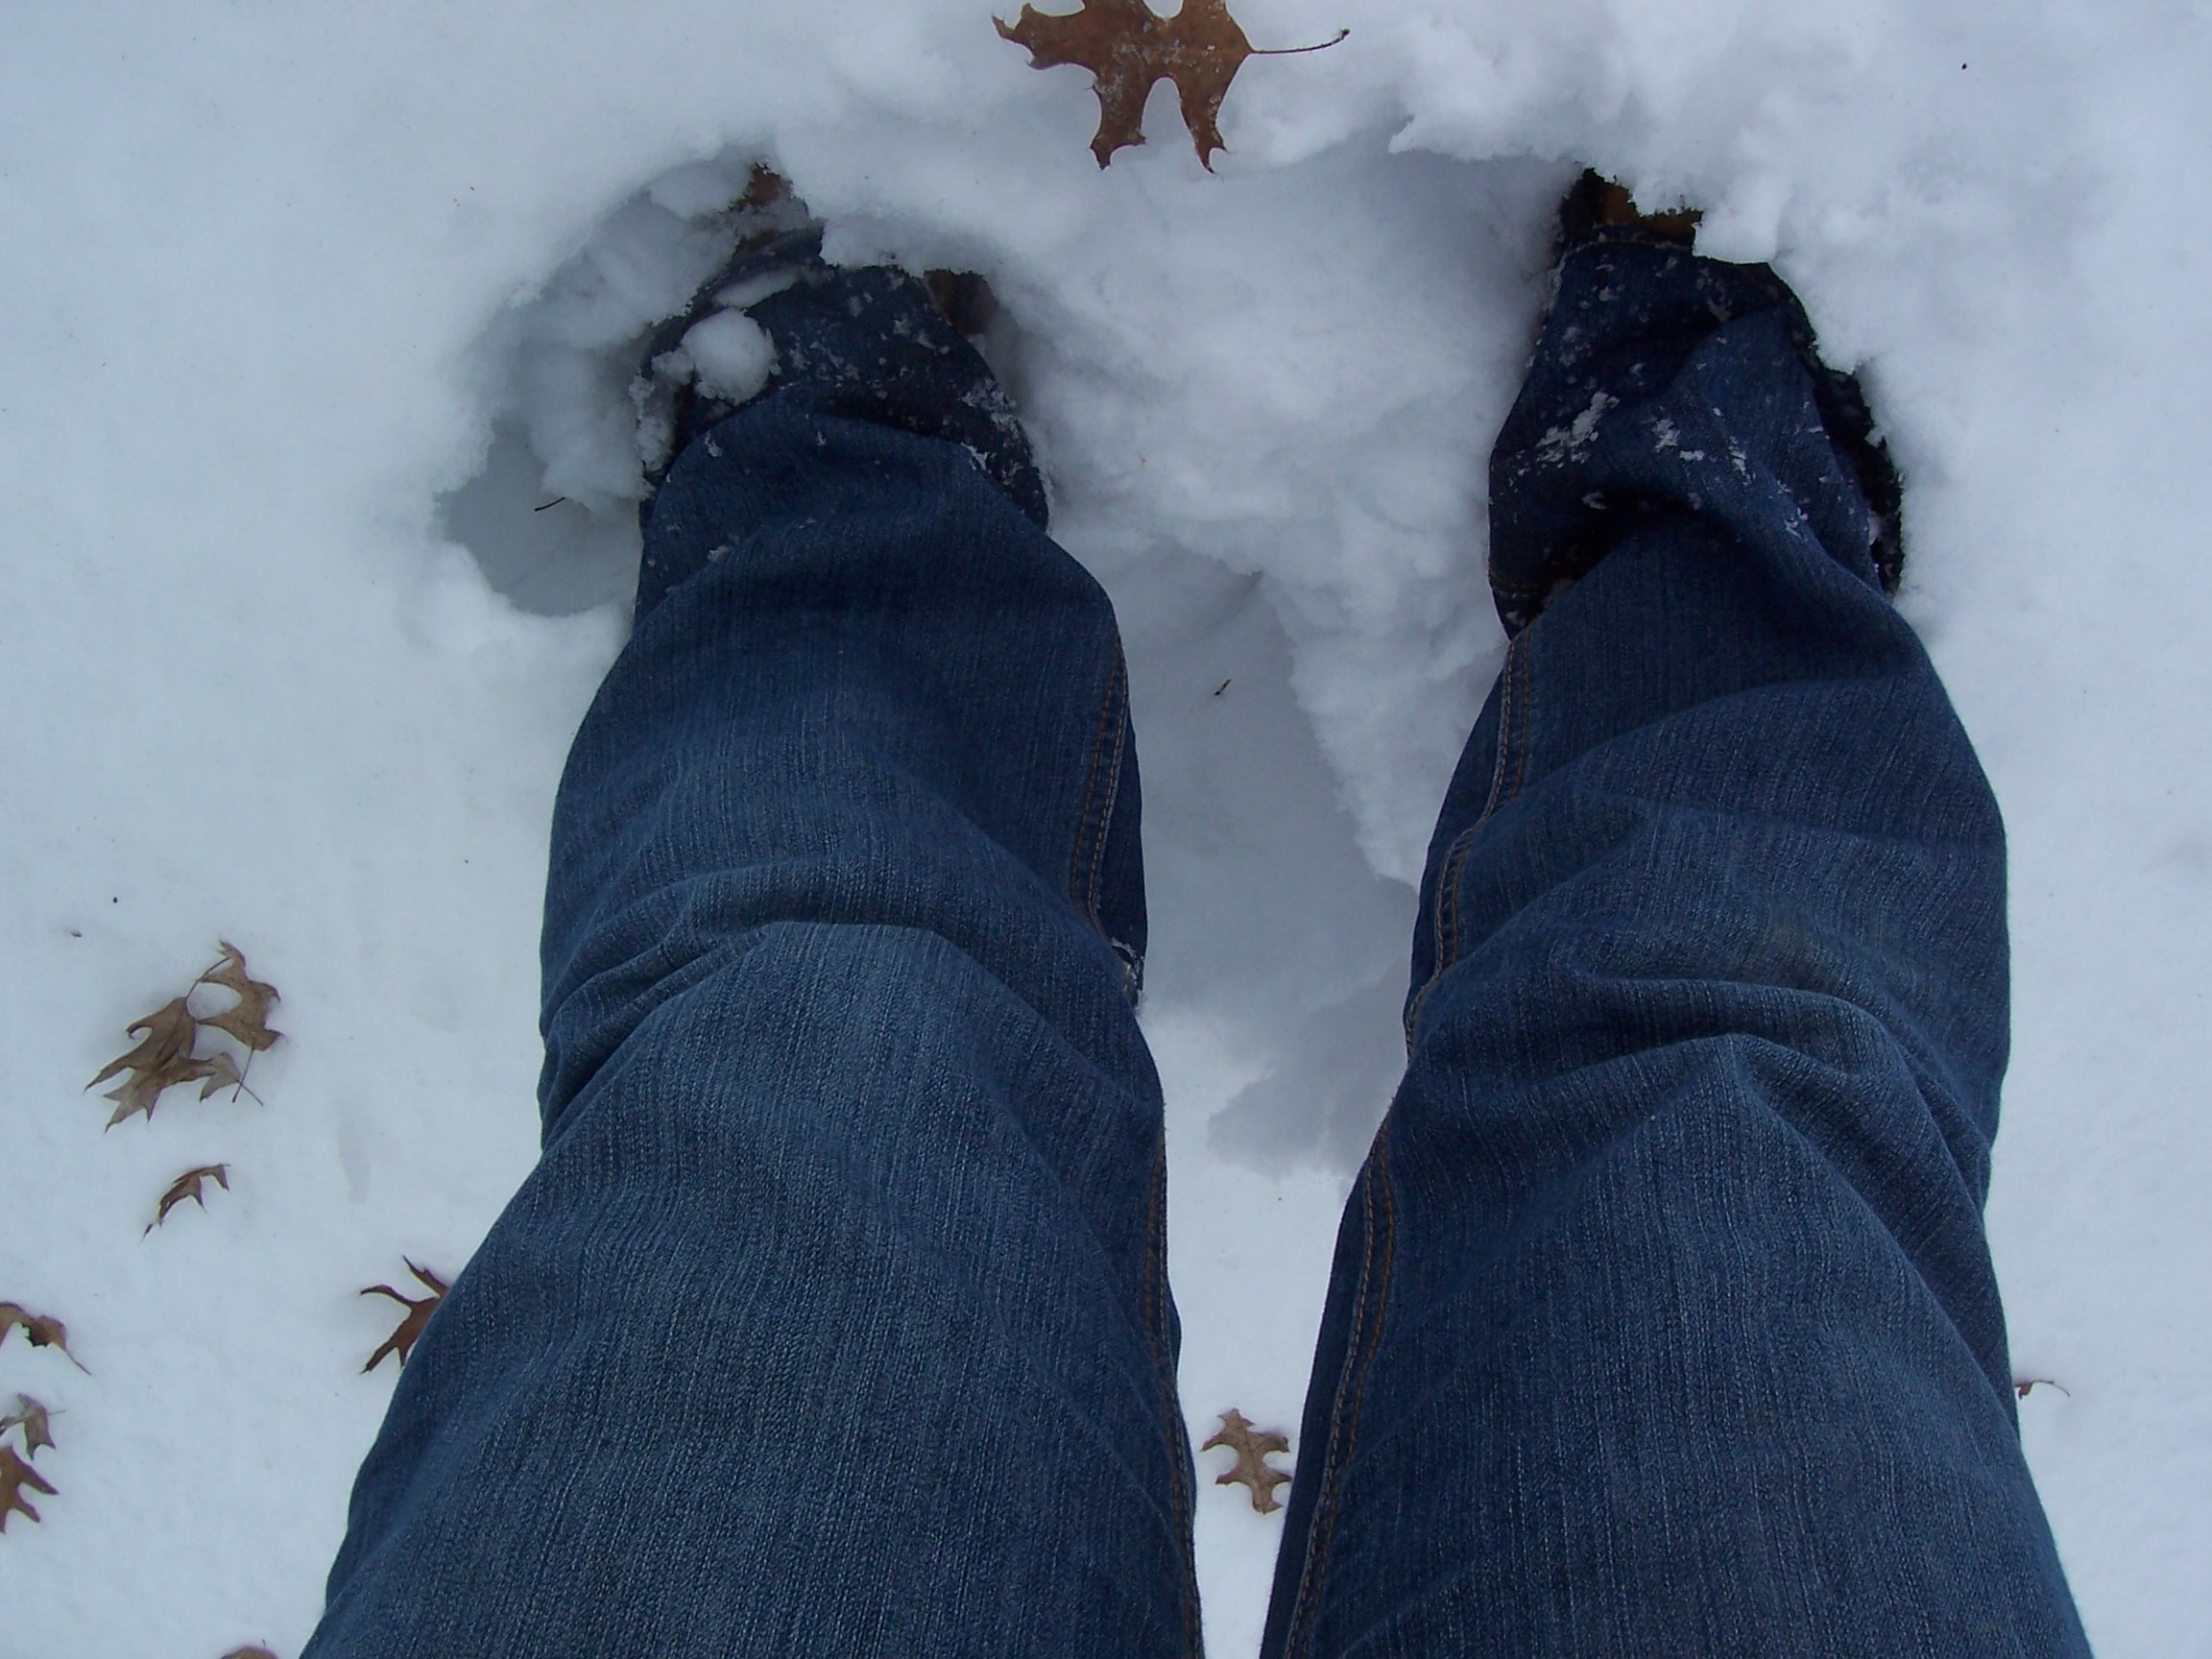 I was in knee deep snow!